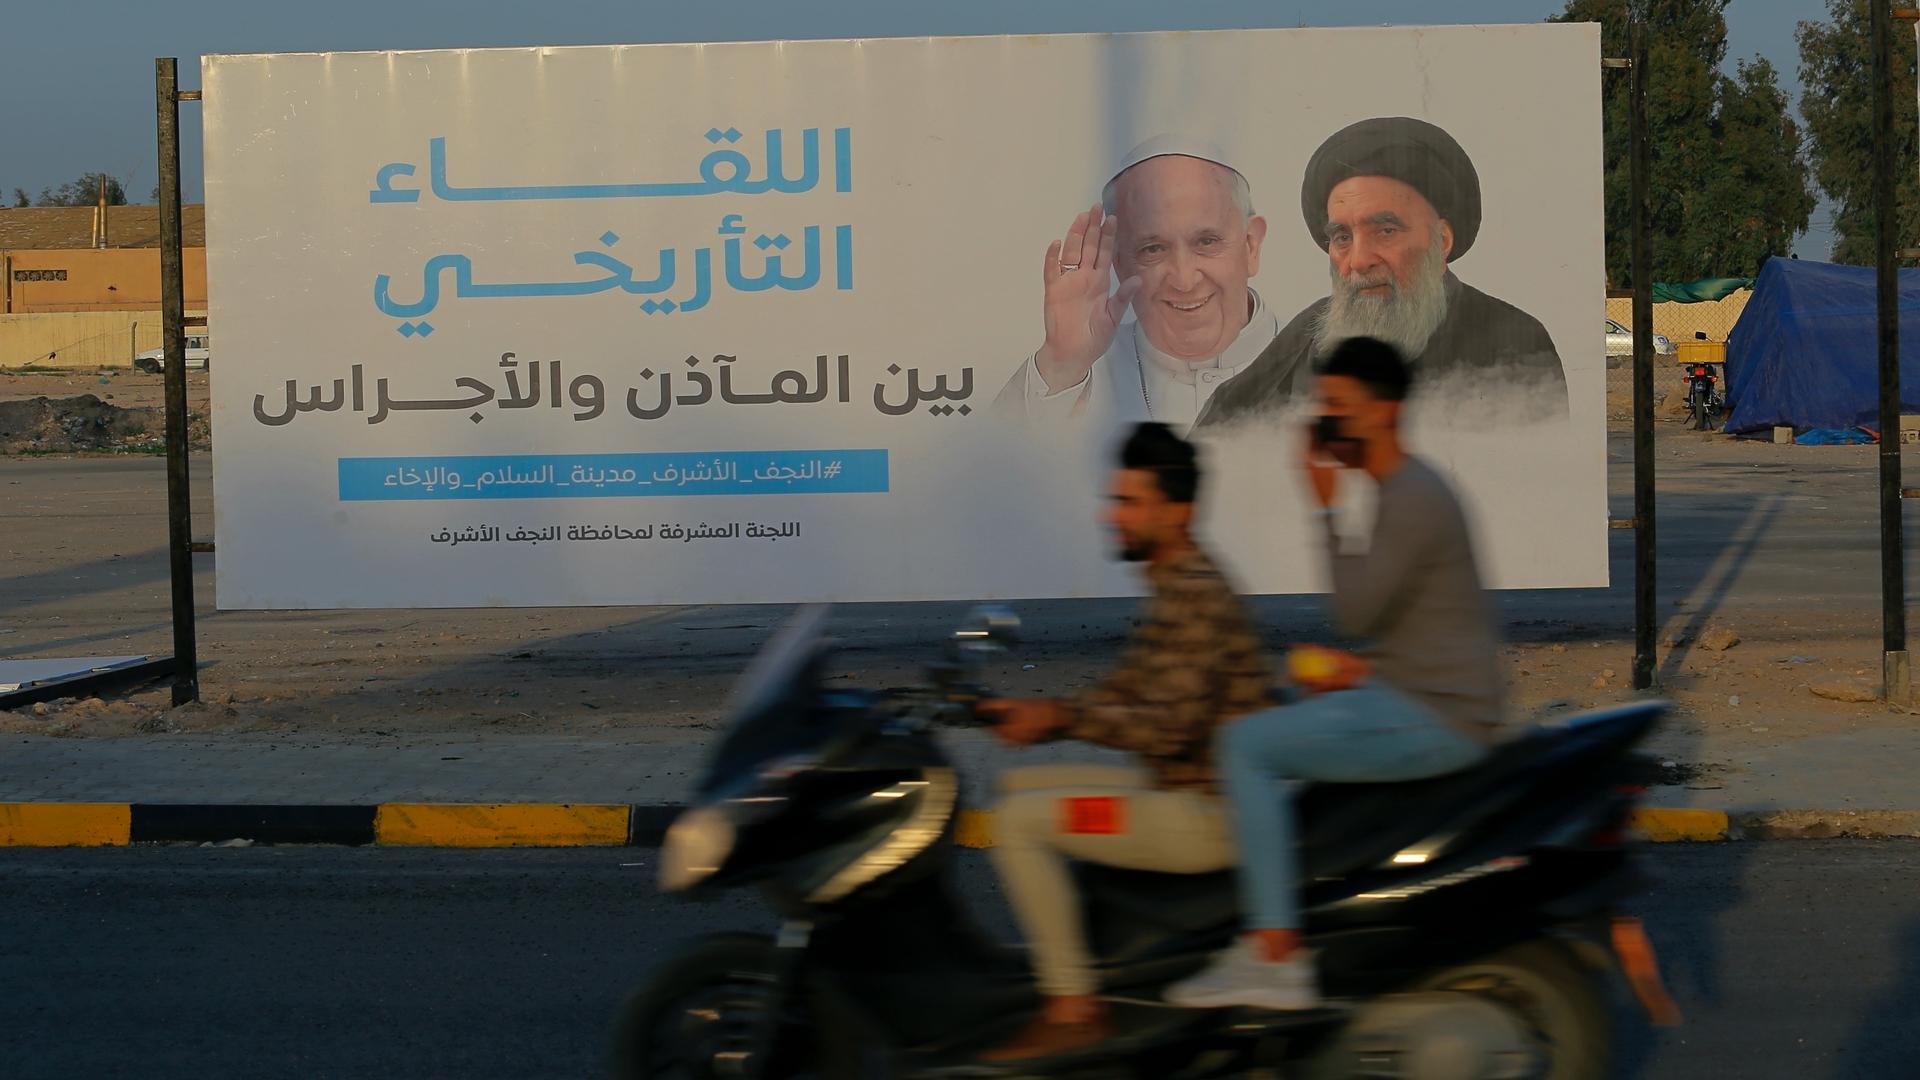 Iraqis put up a poster announcing the upcoming visit of Pope Francis and a meeting with a revered Shiite Muslim leader, Grand Ayatollah Ali al-Sistani, right, in Najaf, Iraq, March 4, 2021.